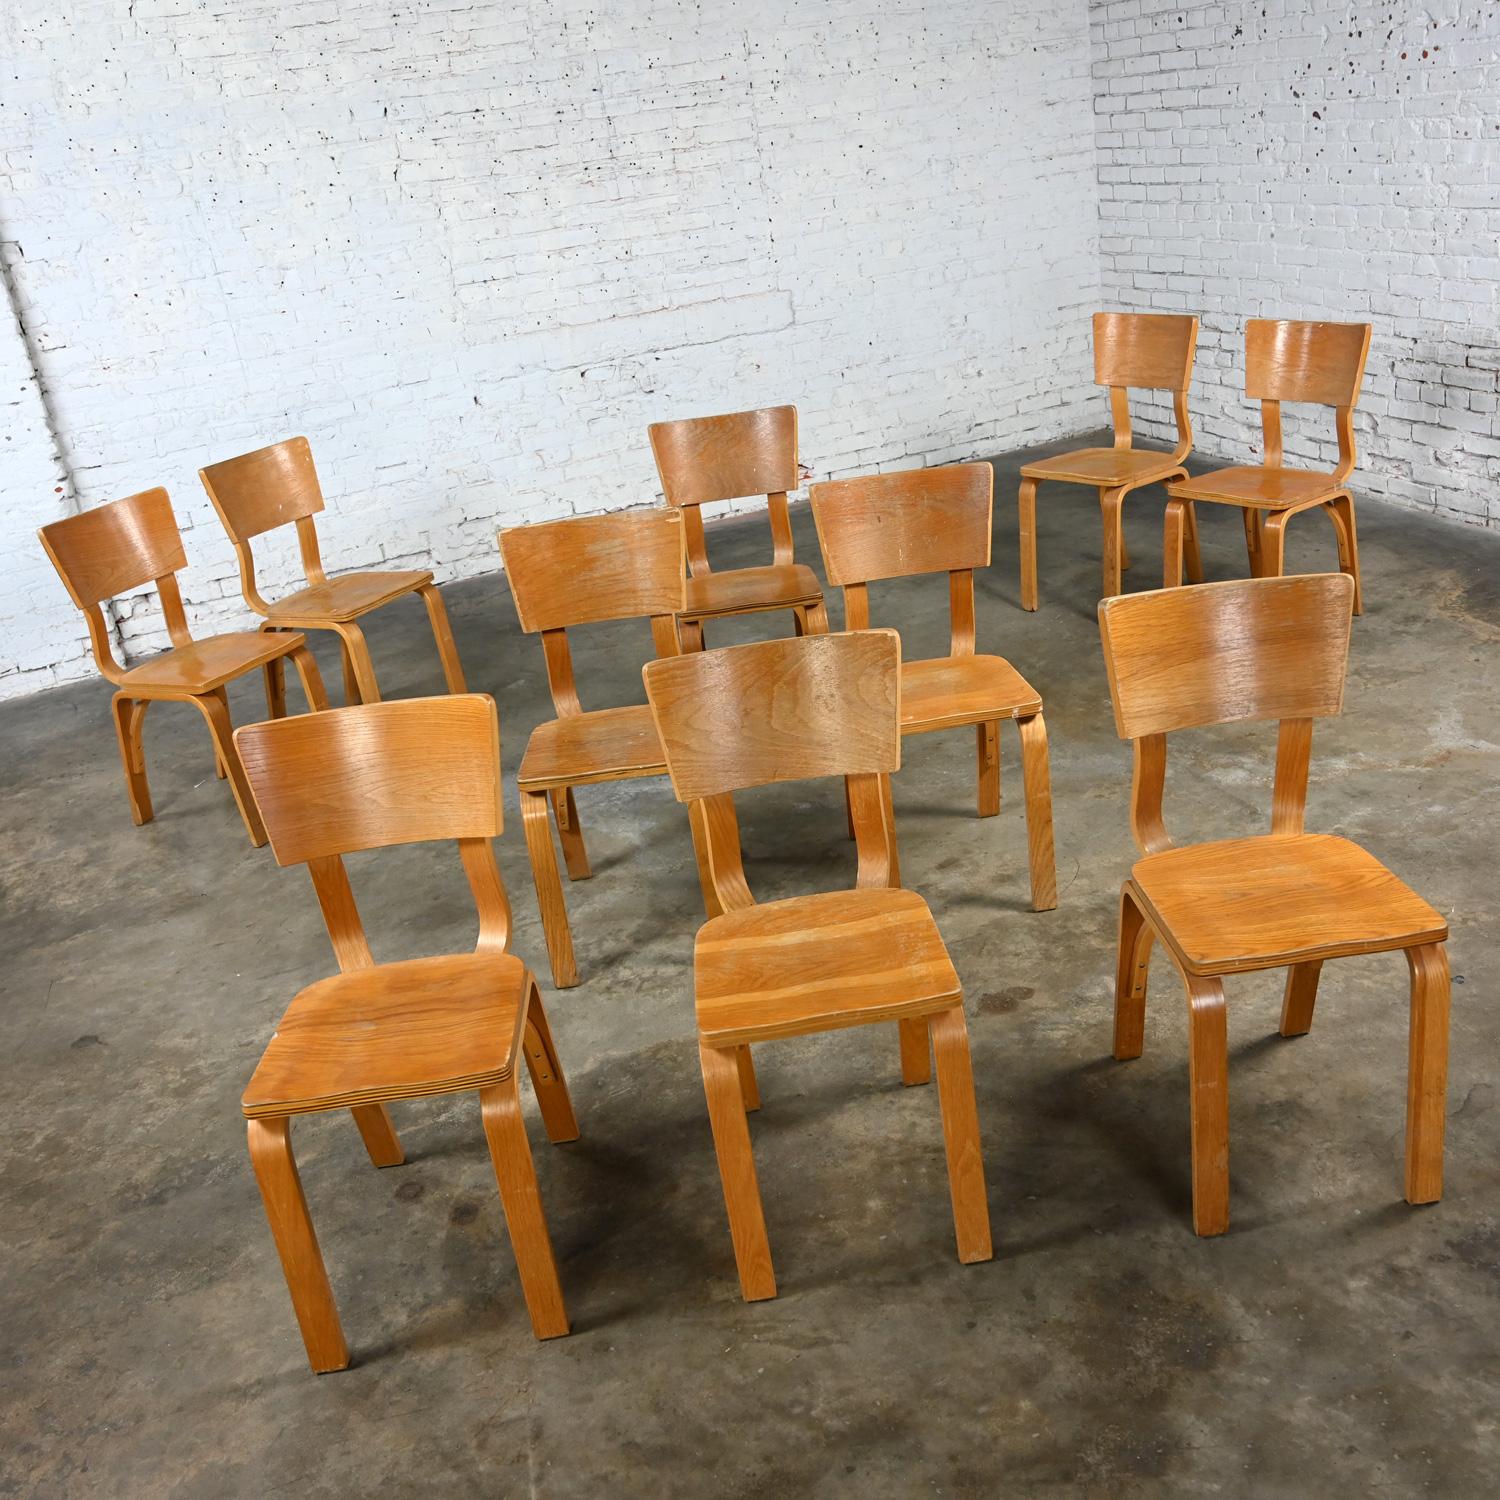 Marvelous vintage Mid-Century Modern Thonet #1216-S17-B1 dining chairs comprised of bent oak plywood with saddle seats and a single bow back stretcher, set of 10. Beautiful condition, keeping in mind that these are vintage and not new so will have